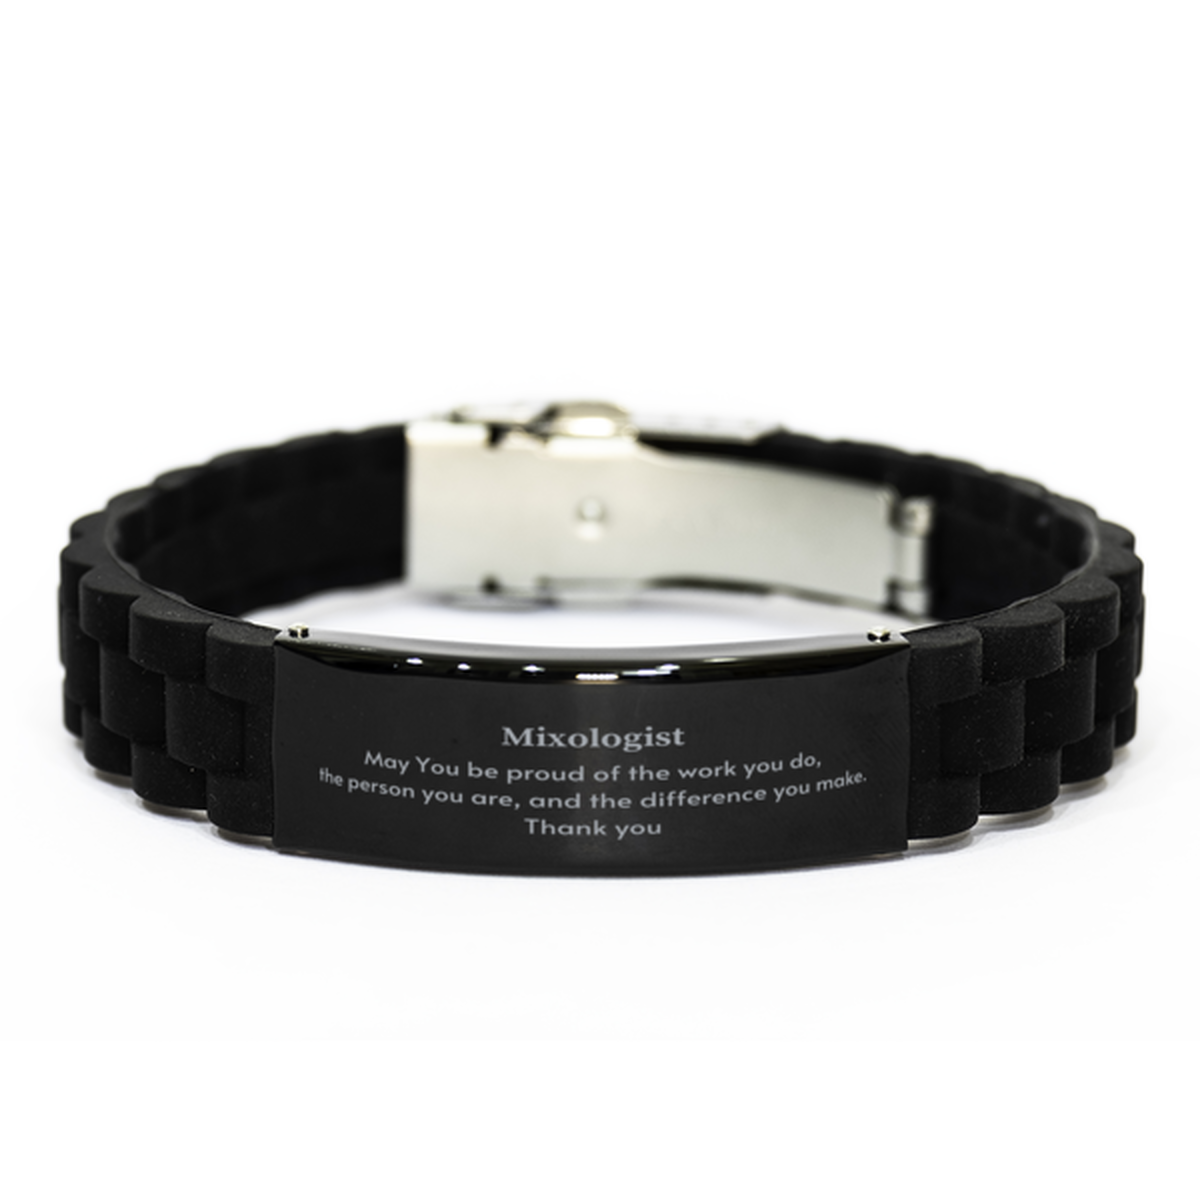 Heartwarming Black Glidelock Clasp Bracelet Retirement Coworkers Gifts for Mixologist, Mixologist May You be proud of the work you do, the person you are Gifts for Boss Men Women Friends